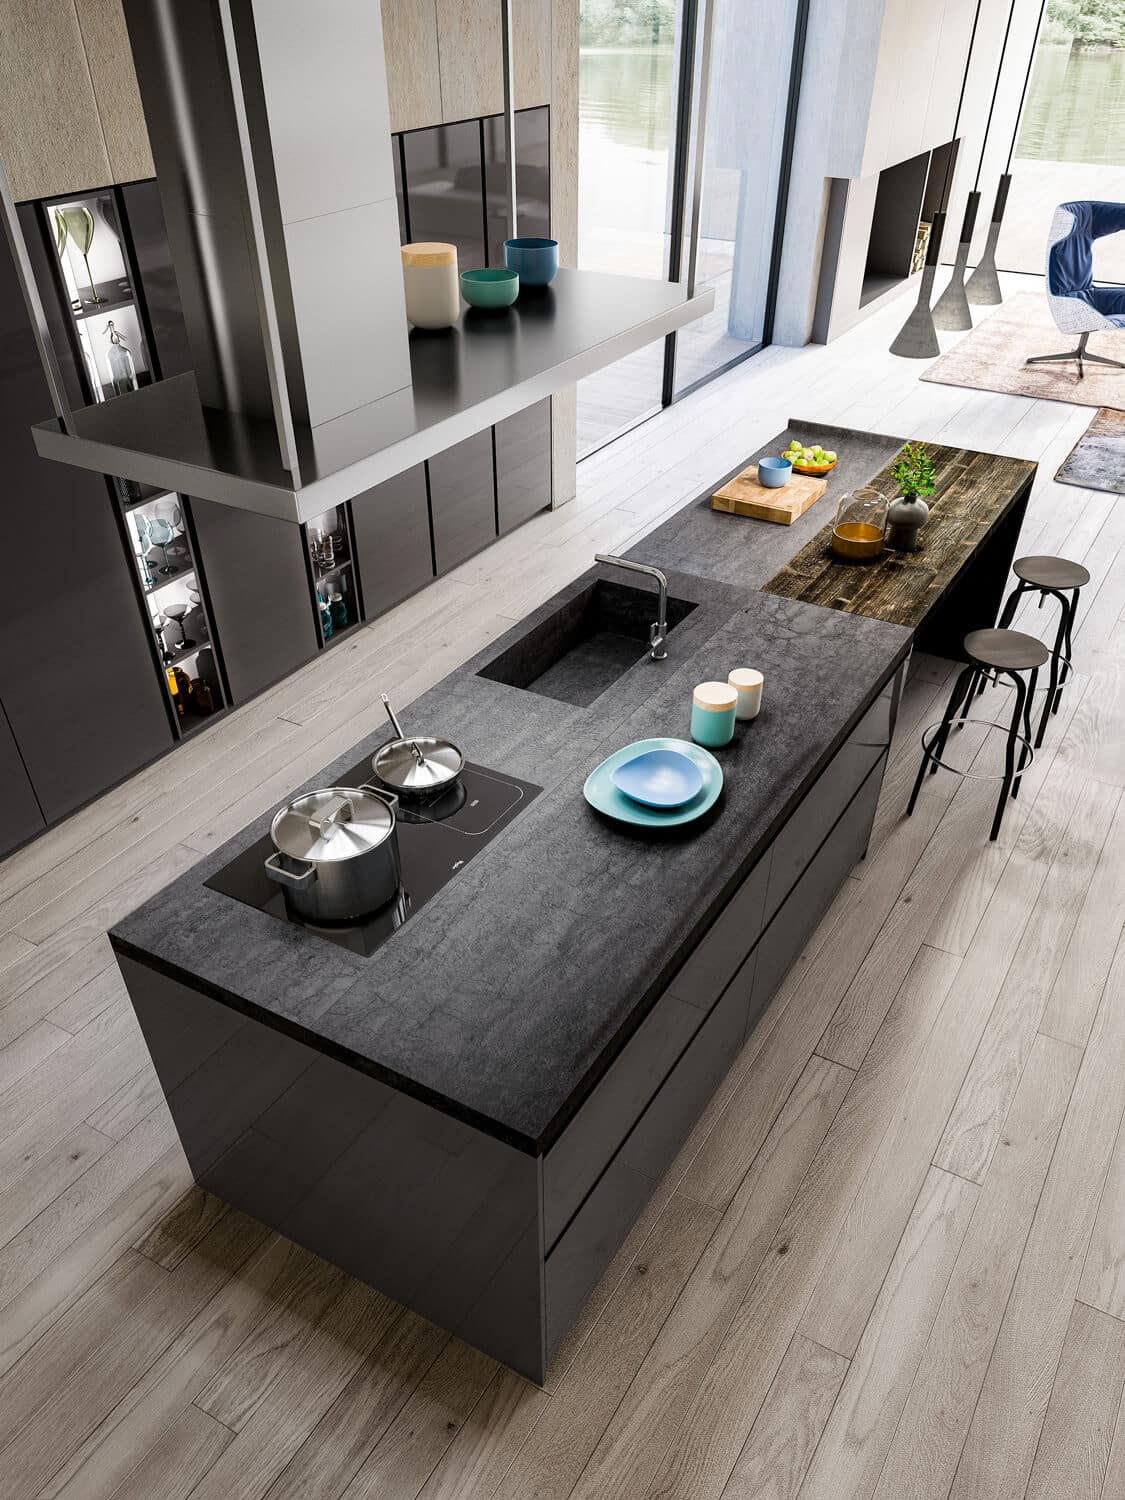 Island countertop in Antracite Laminam, with table in Old Abete Nero wood. 